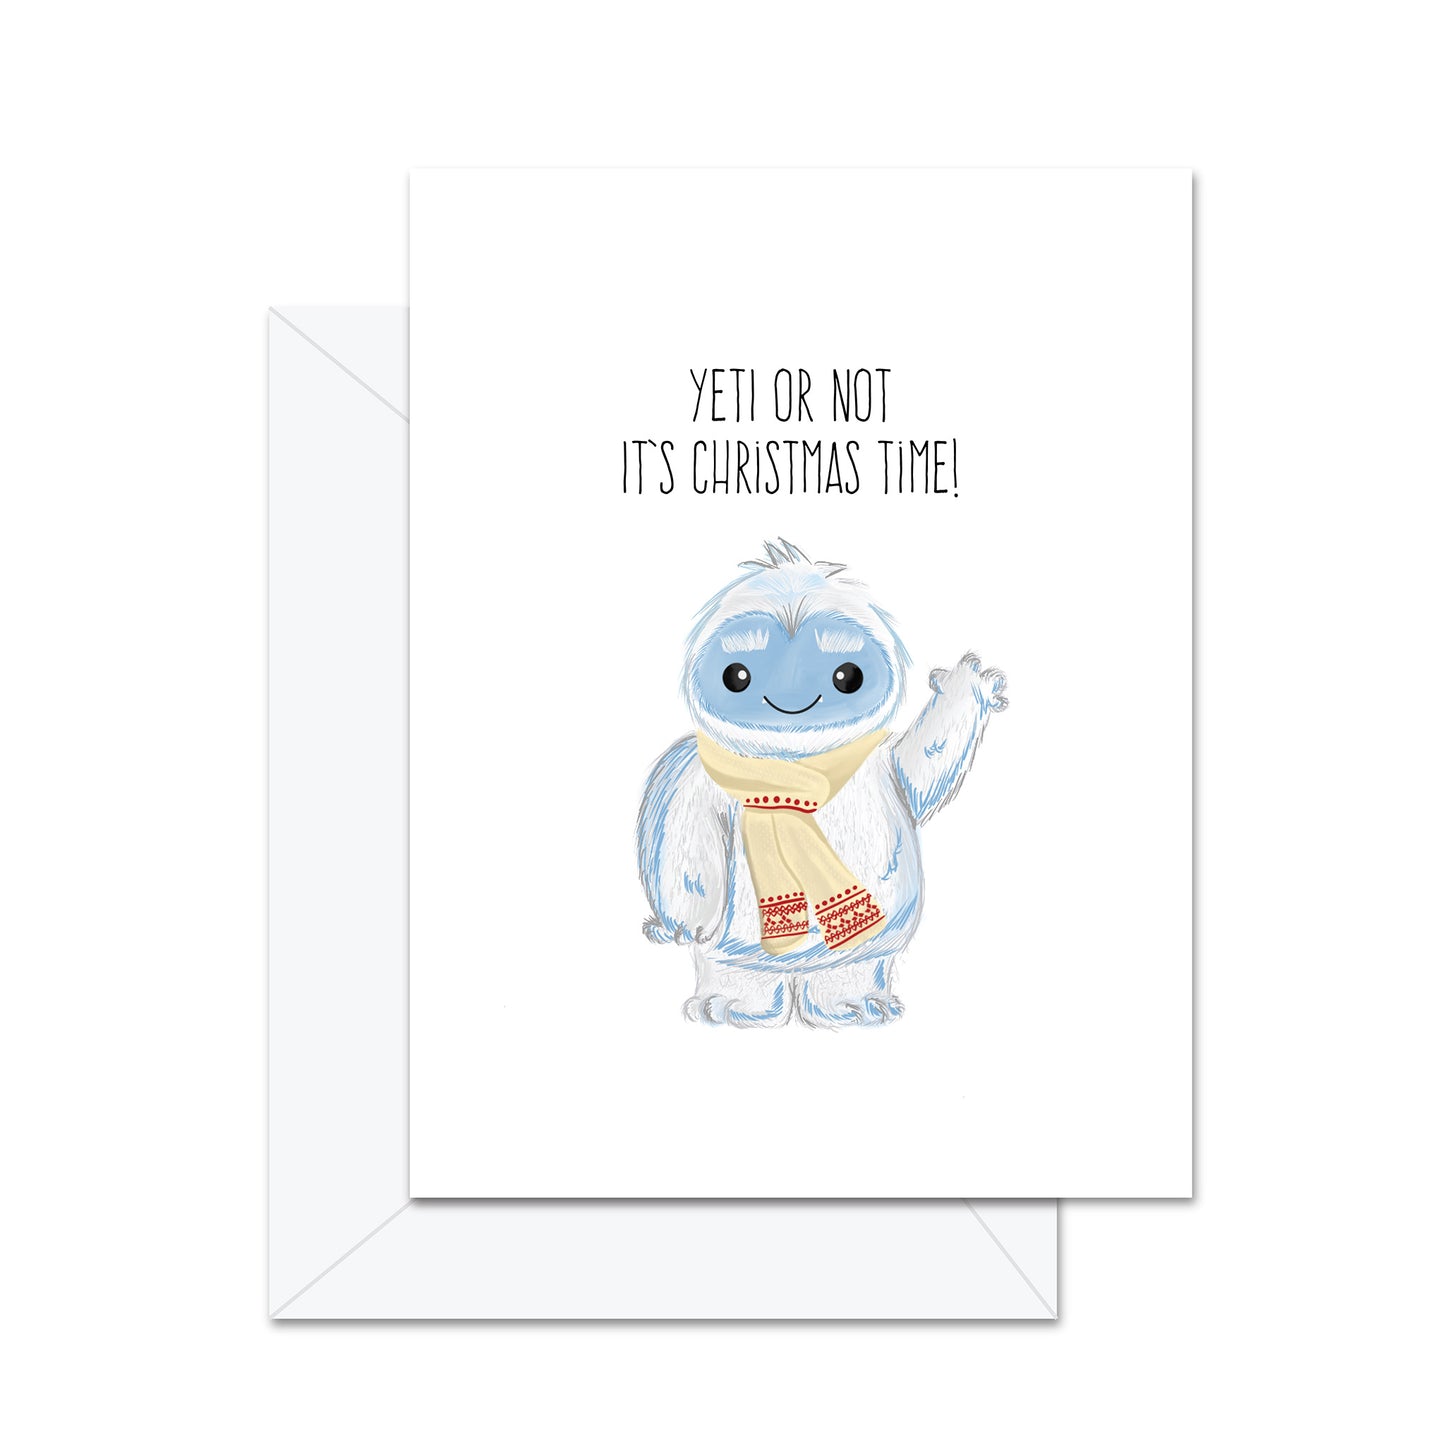 Yeti Or Not It's Christmas Time - Greeting Card